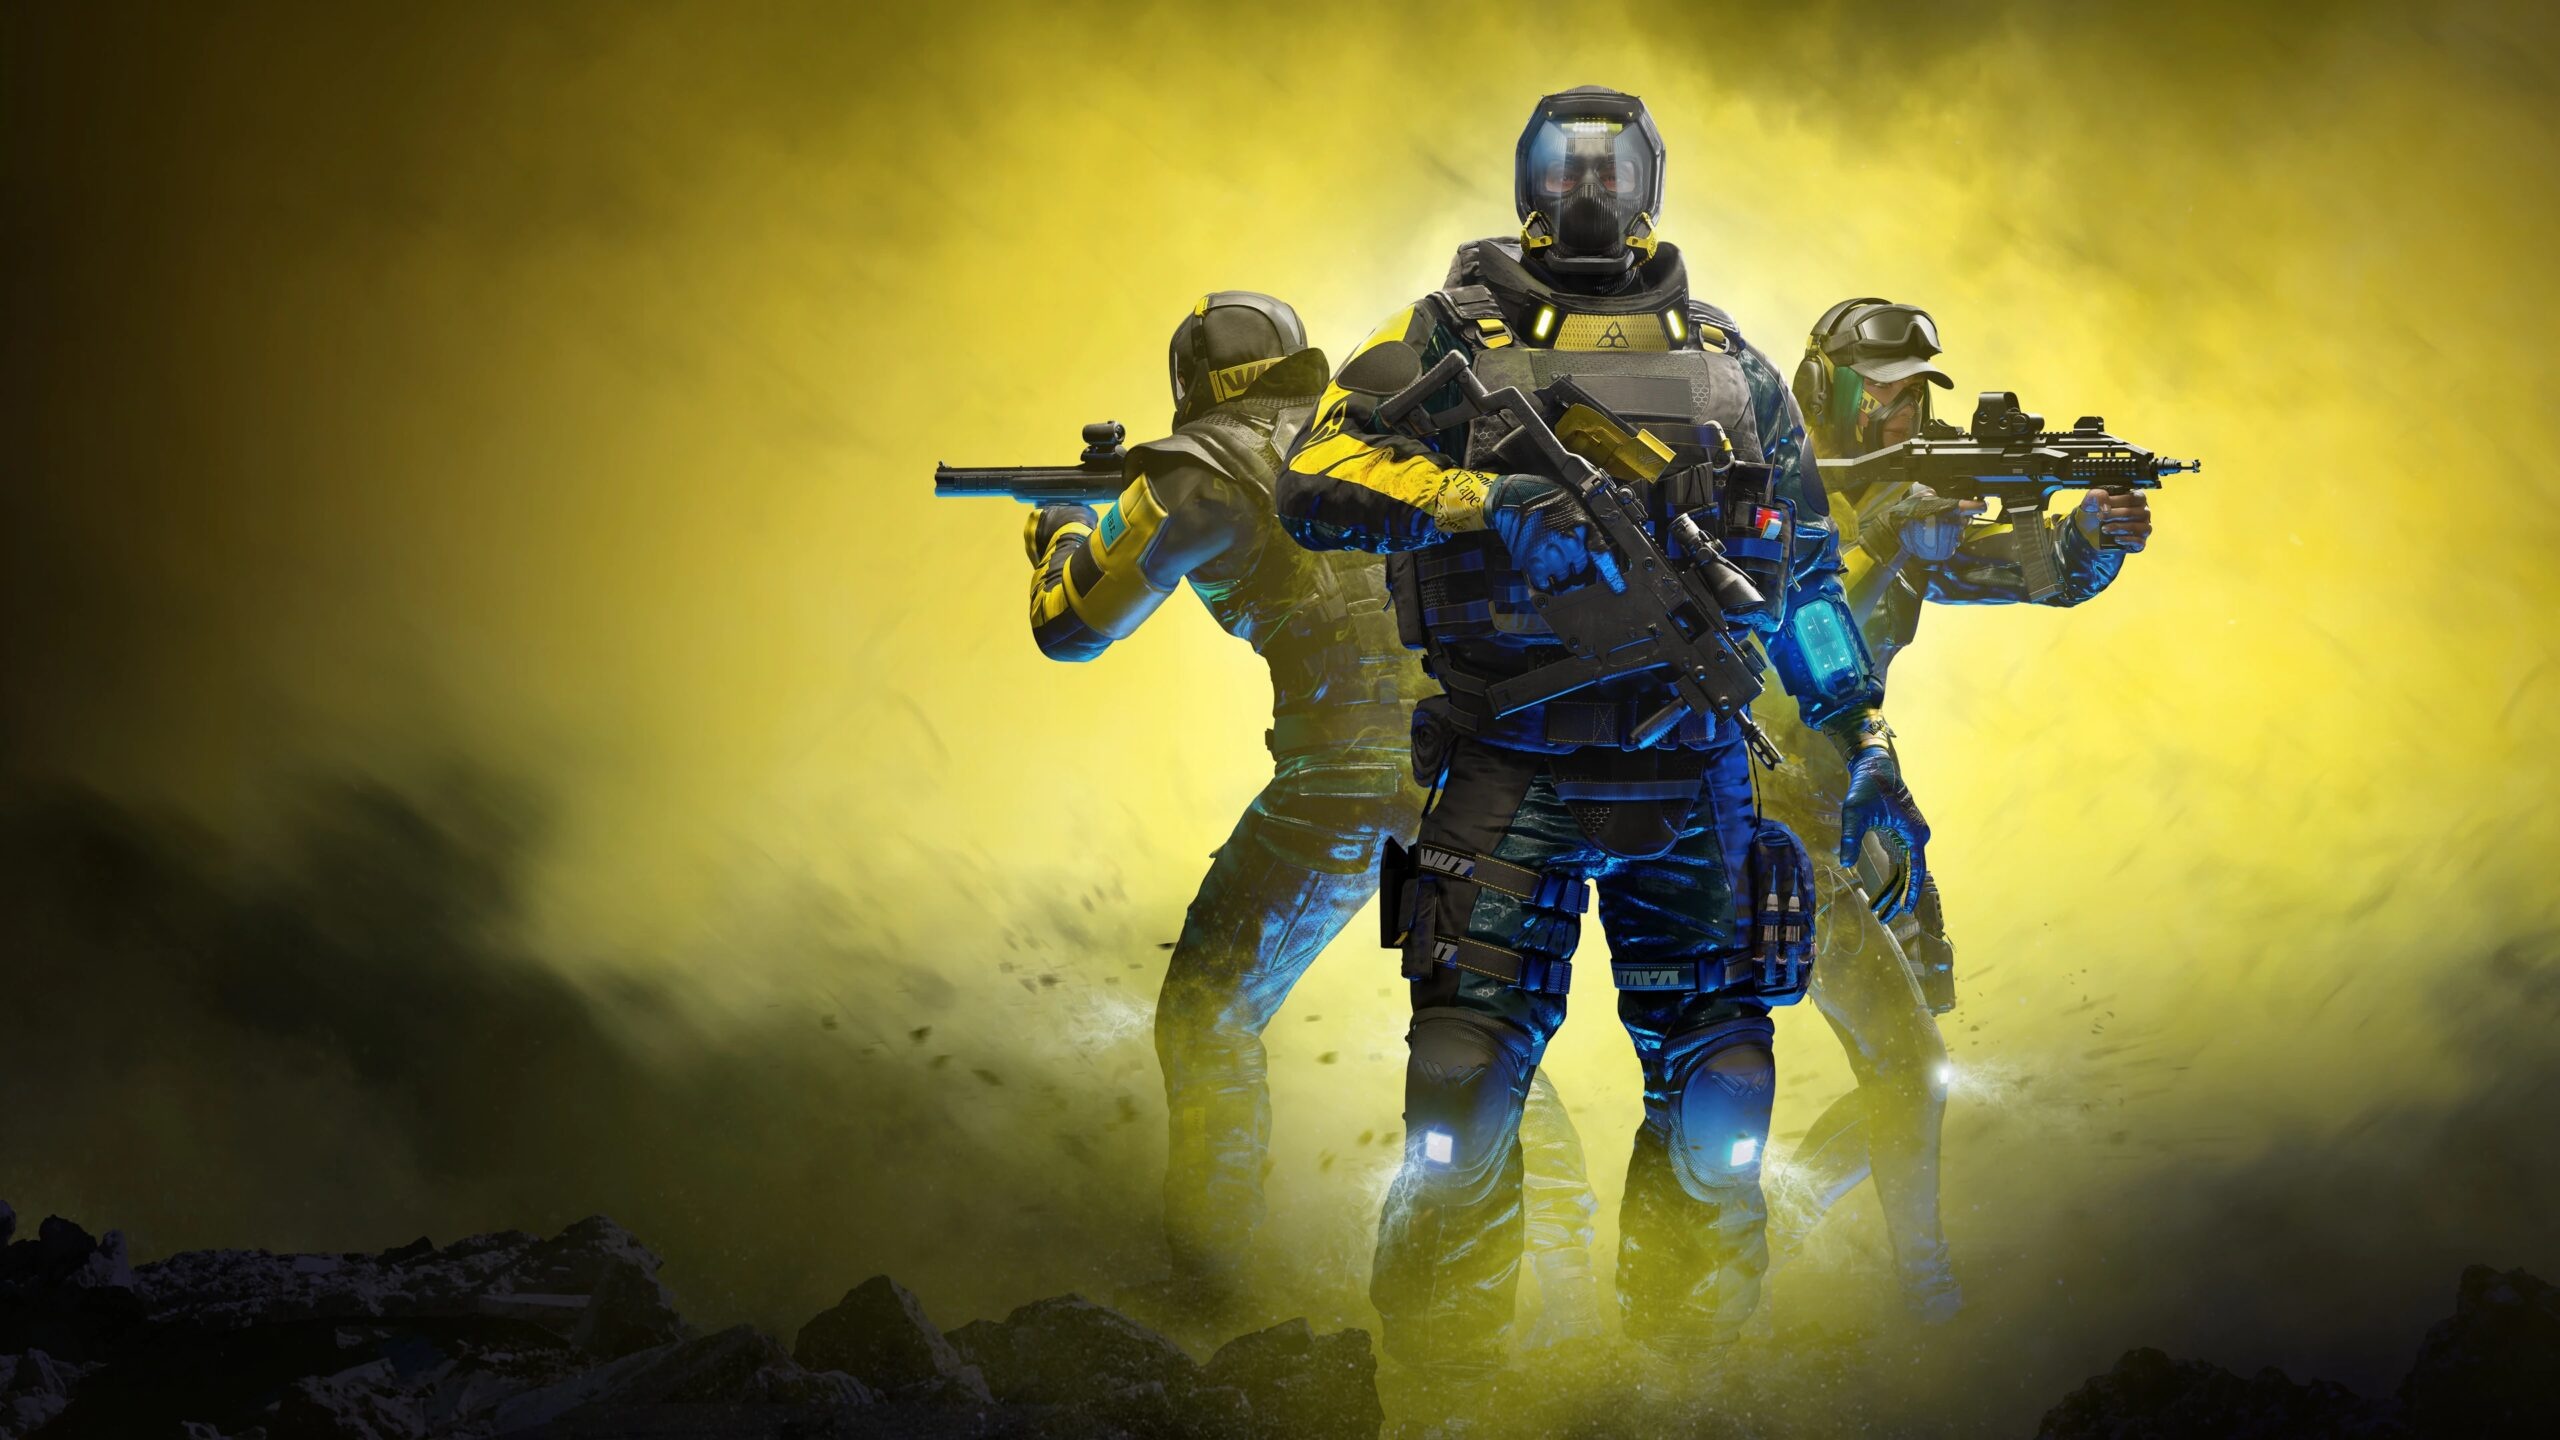 Rainbow Six Extraction: A Medium Armored Operator, Lion, Comes with his EE-ONE-D. 2560x1440 HD Wallpaper.